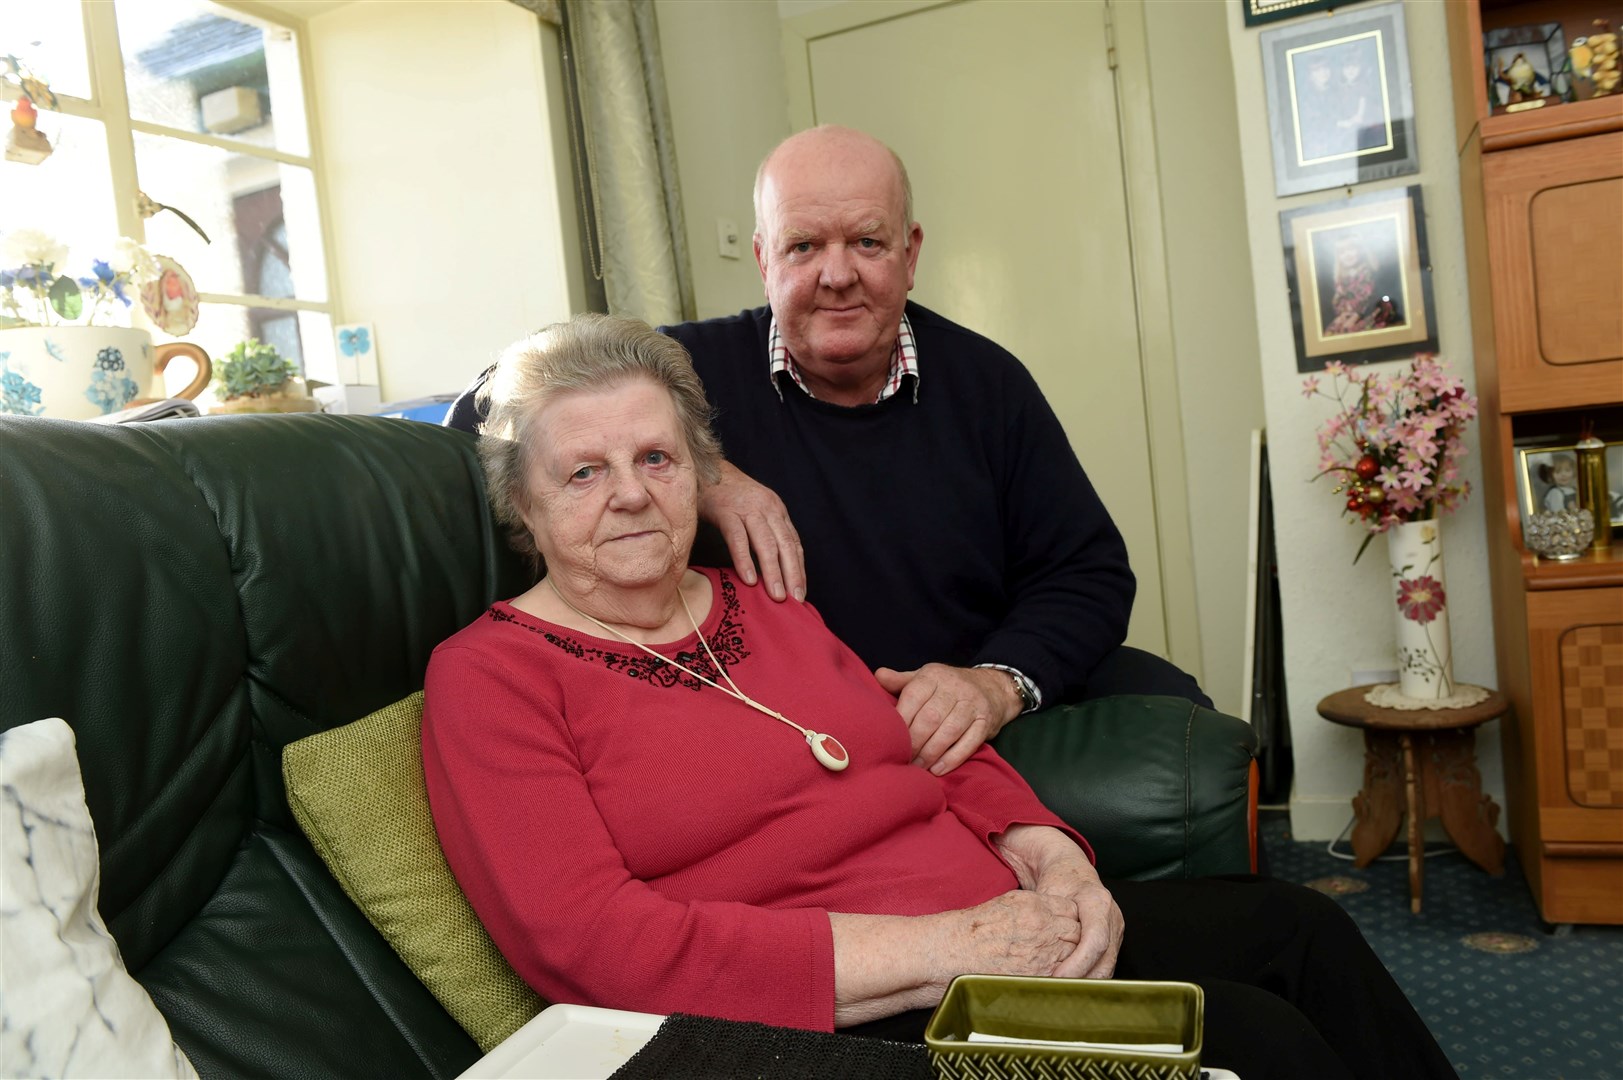 Mother and son Alison Joyce Sutherland (87) and Mike Sutherland (62) were shocked by the notice. Picture: Callum Mackay